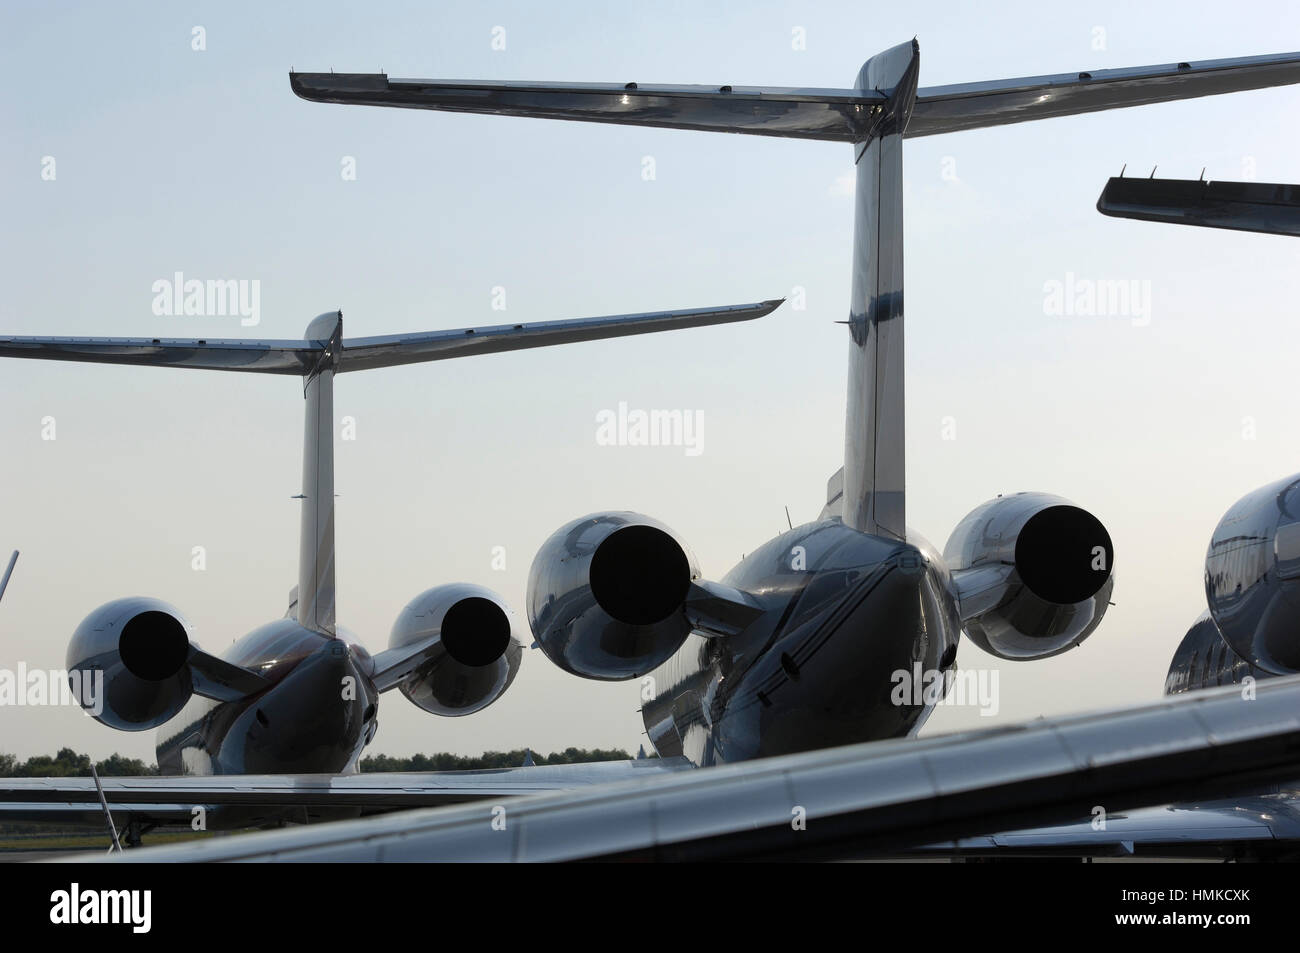 tail-fin Rolls-Royce Tay 611-8 engine-exhausts Gulfstream 450 tail-fin BR710 engine-exhausts G550 parked behind in Stock Photo